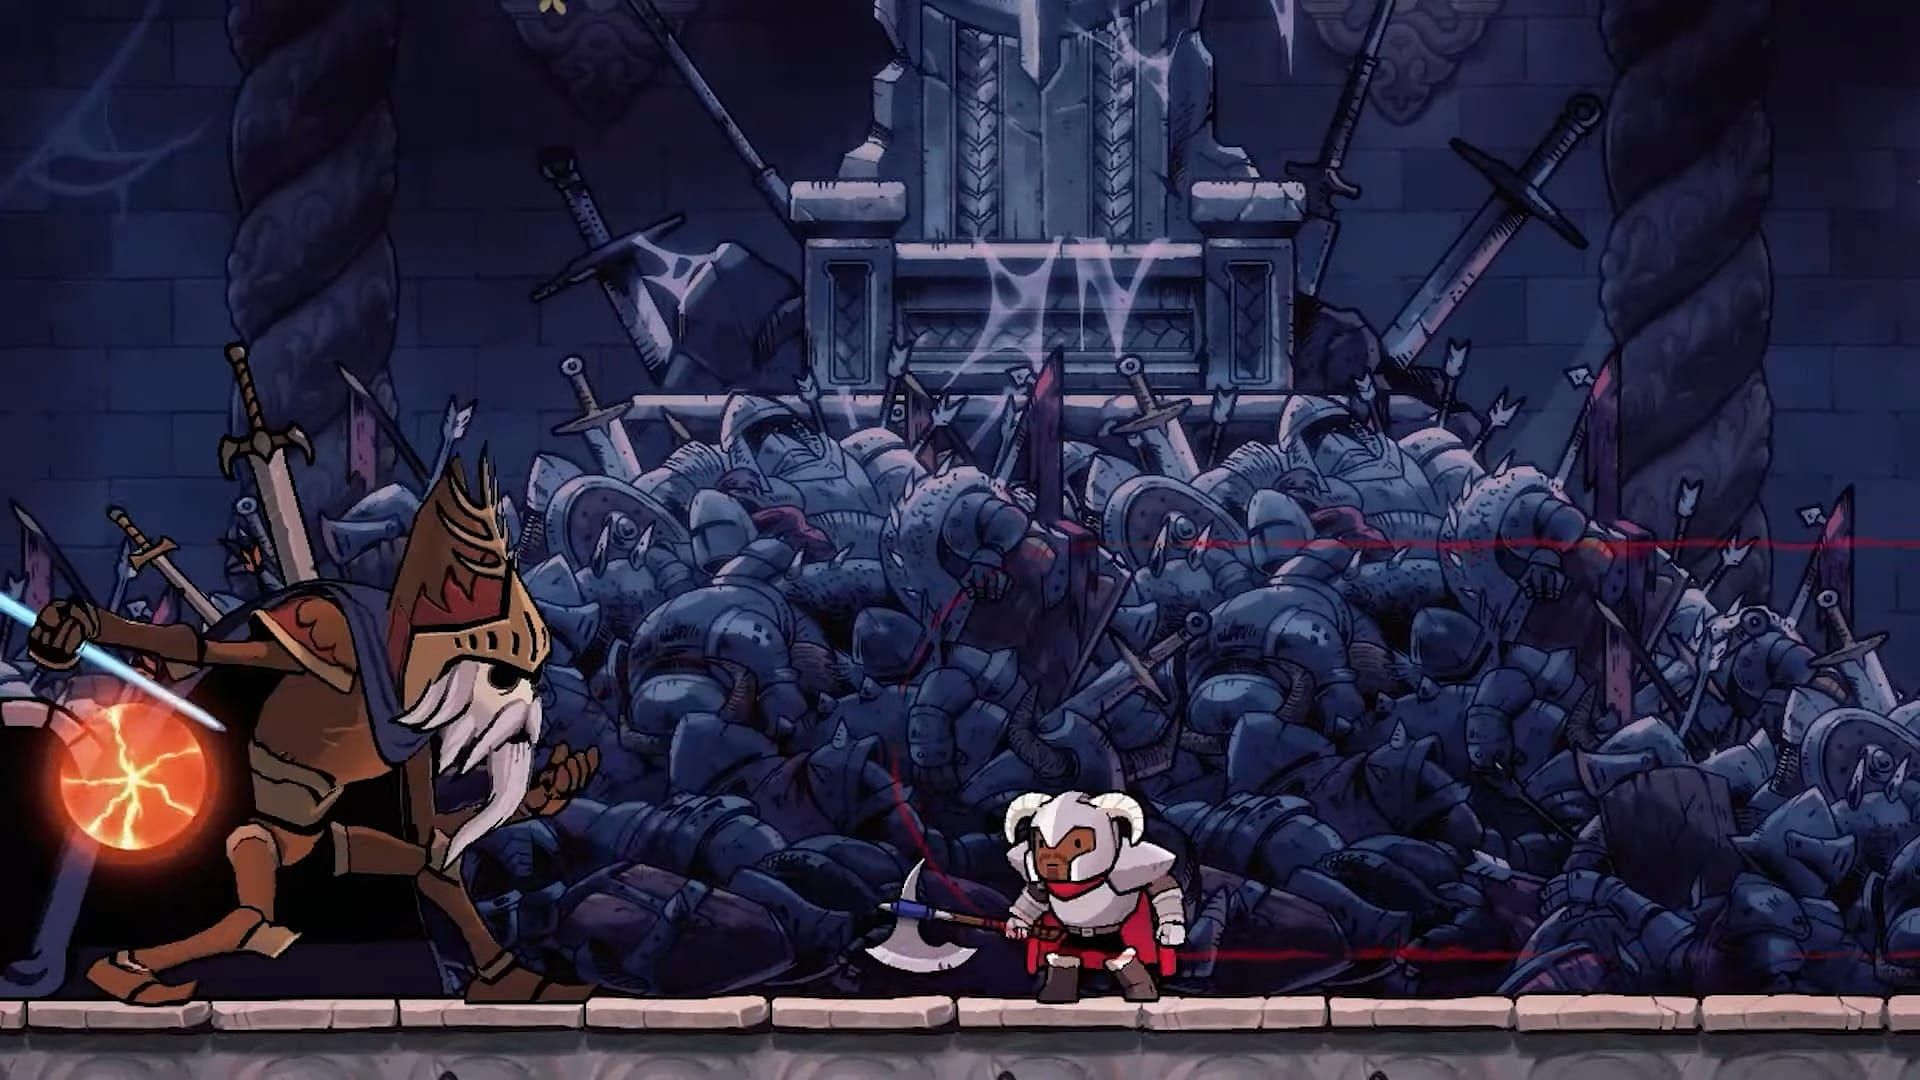 Every run gives out a fresh challenge in Rogue Legacy 2 (Image via Rogue Legacy 2)